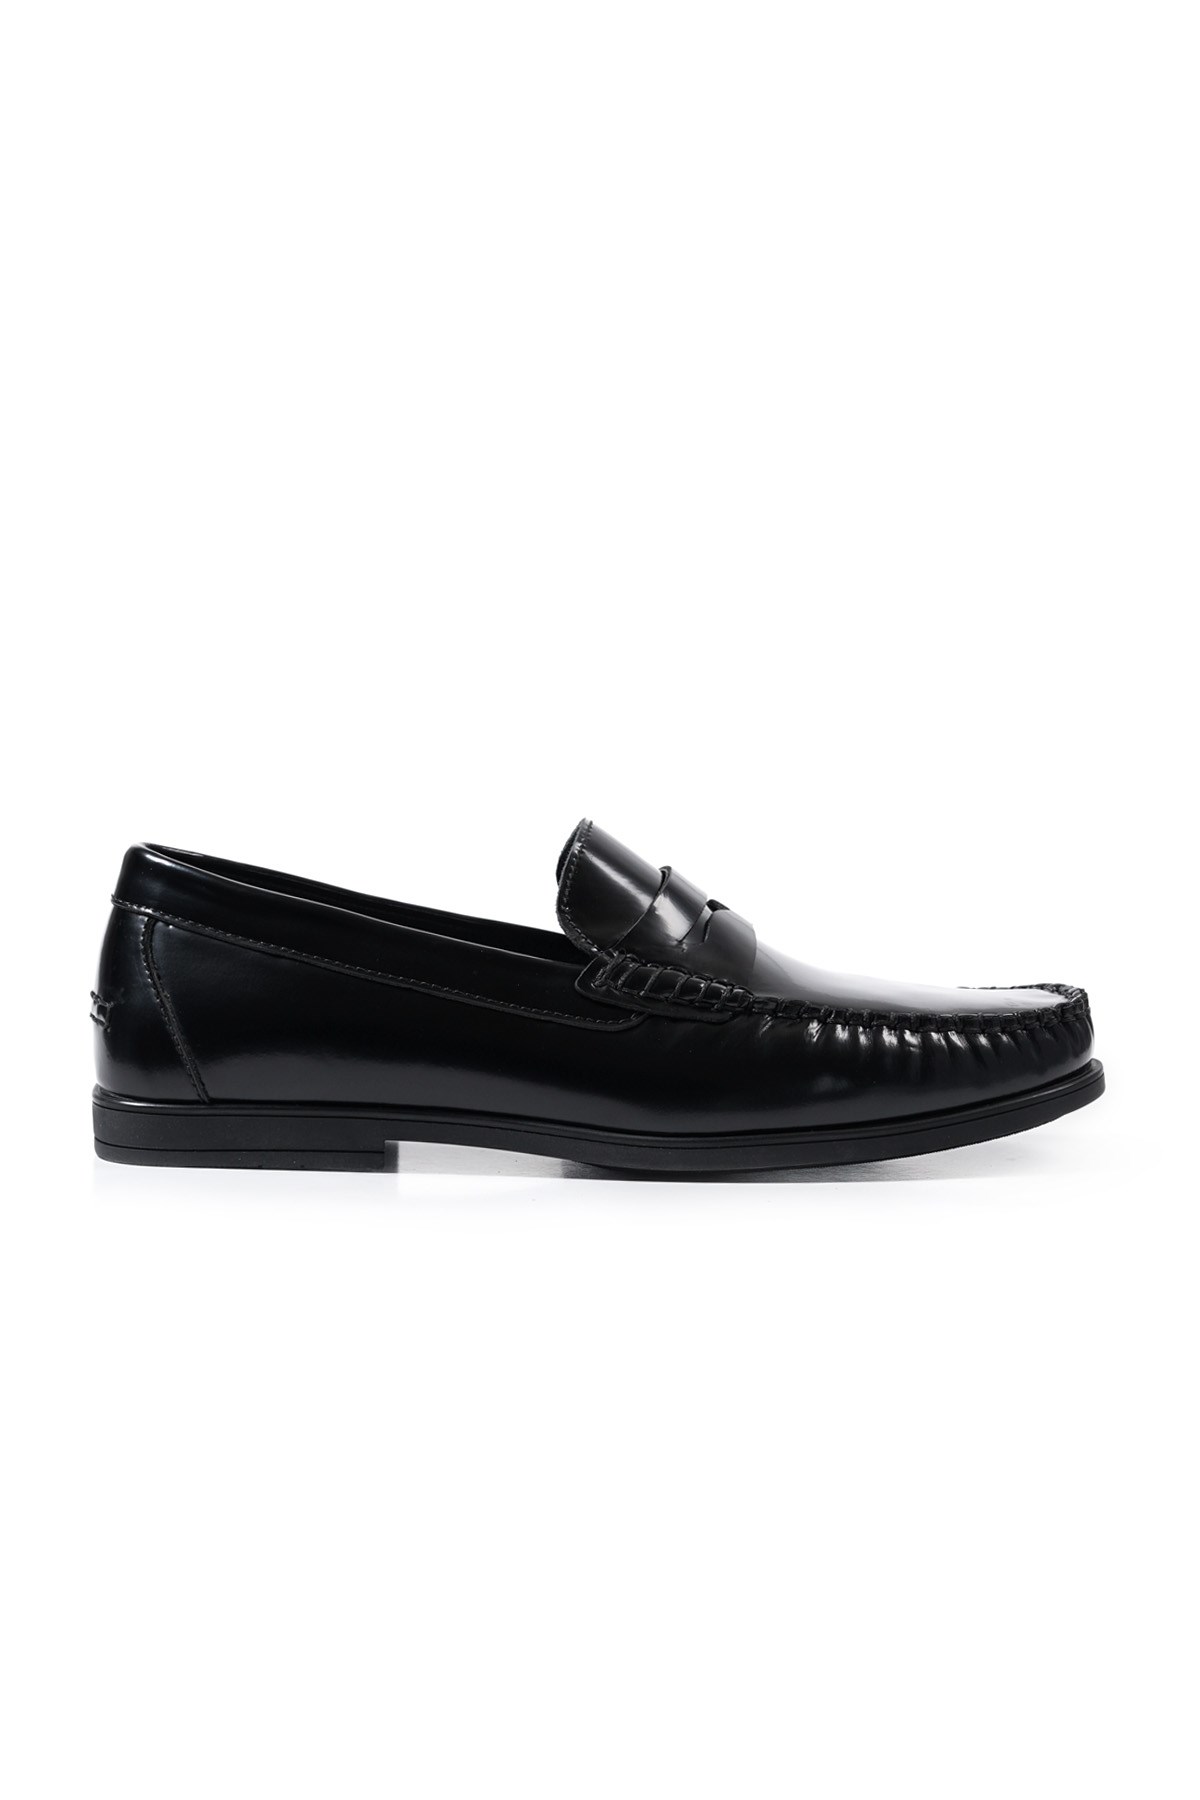 Cordelion Inner Outer Genuine Leather Laceless Black Opening Leather Loafer College Men's Shoes